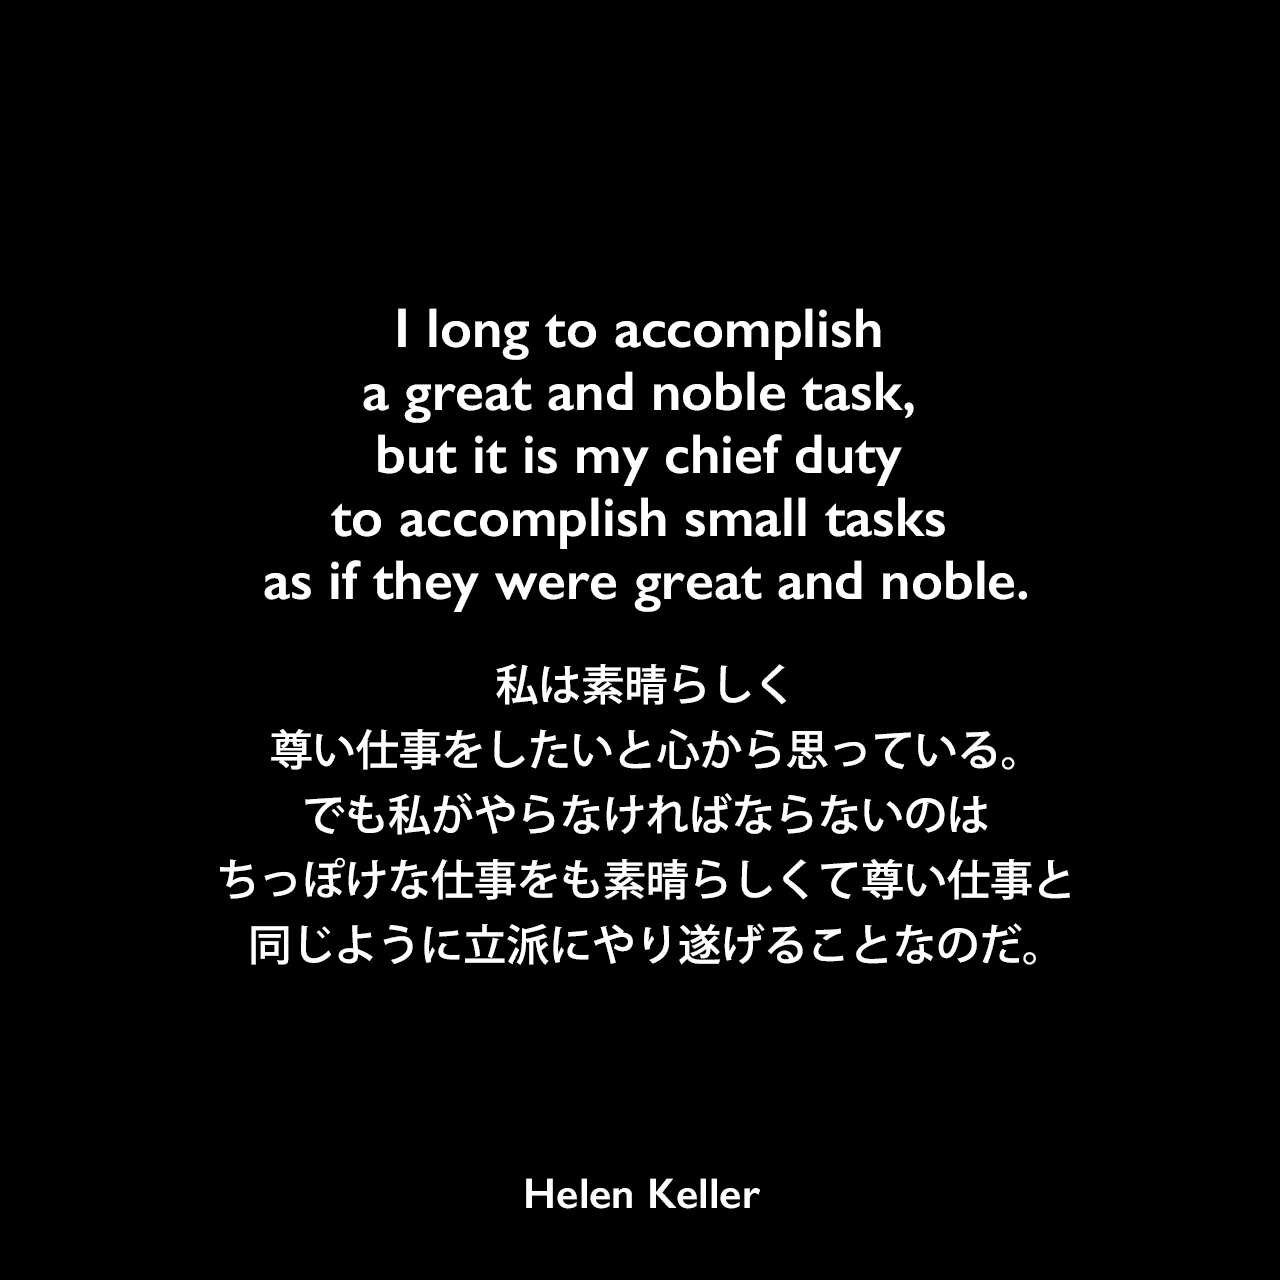 I long to accomplish a great and noble task, but it is my chief duty to accomplish small tasks as if they were great and noble.私は素晴らしく尊い仕事をしたいと心から思っている。でも私がやらなければならないのは、ちっぽけな仕事をも素晴らしくて尊い仕事と同じように立派にやり遂げることなのだ。Helen Keller